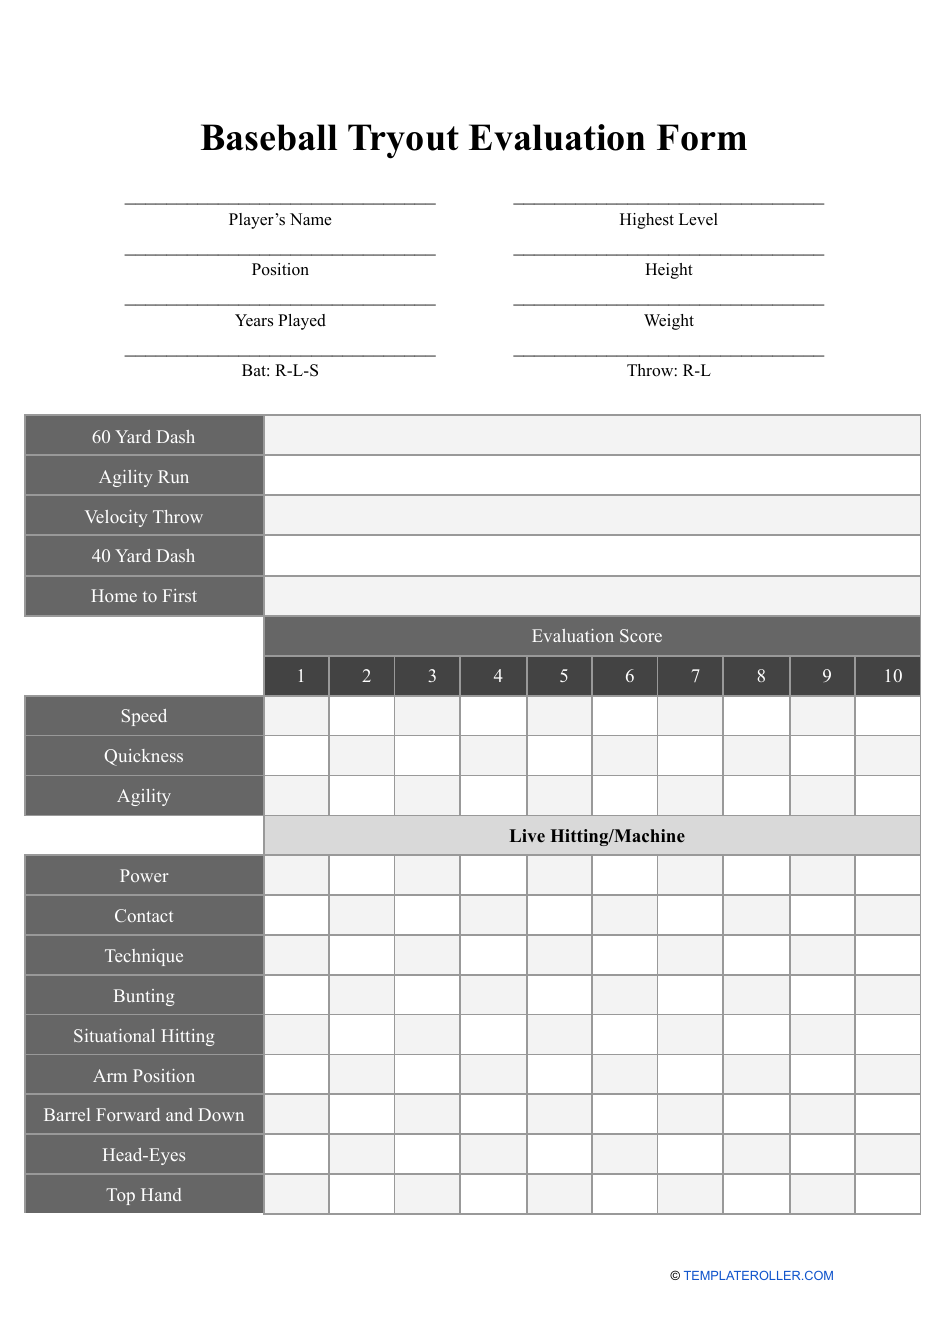 baseball-tryout-evaluation-form-fill-out-sign-online-and-download